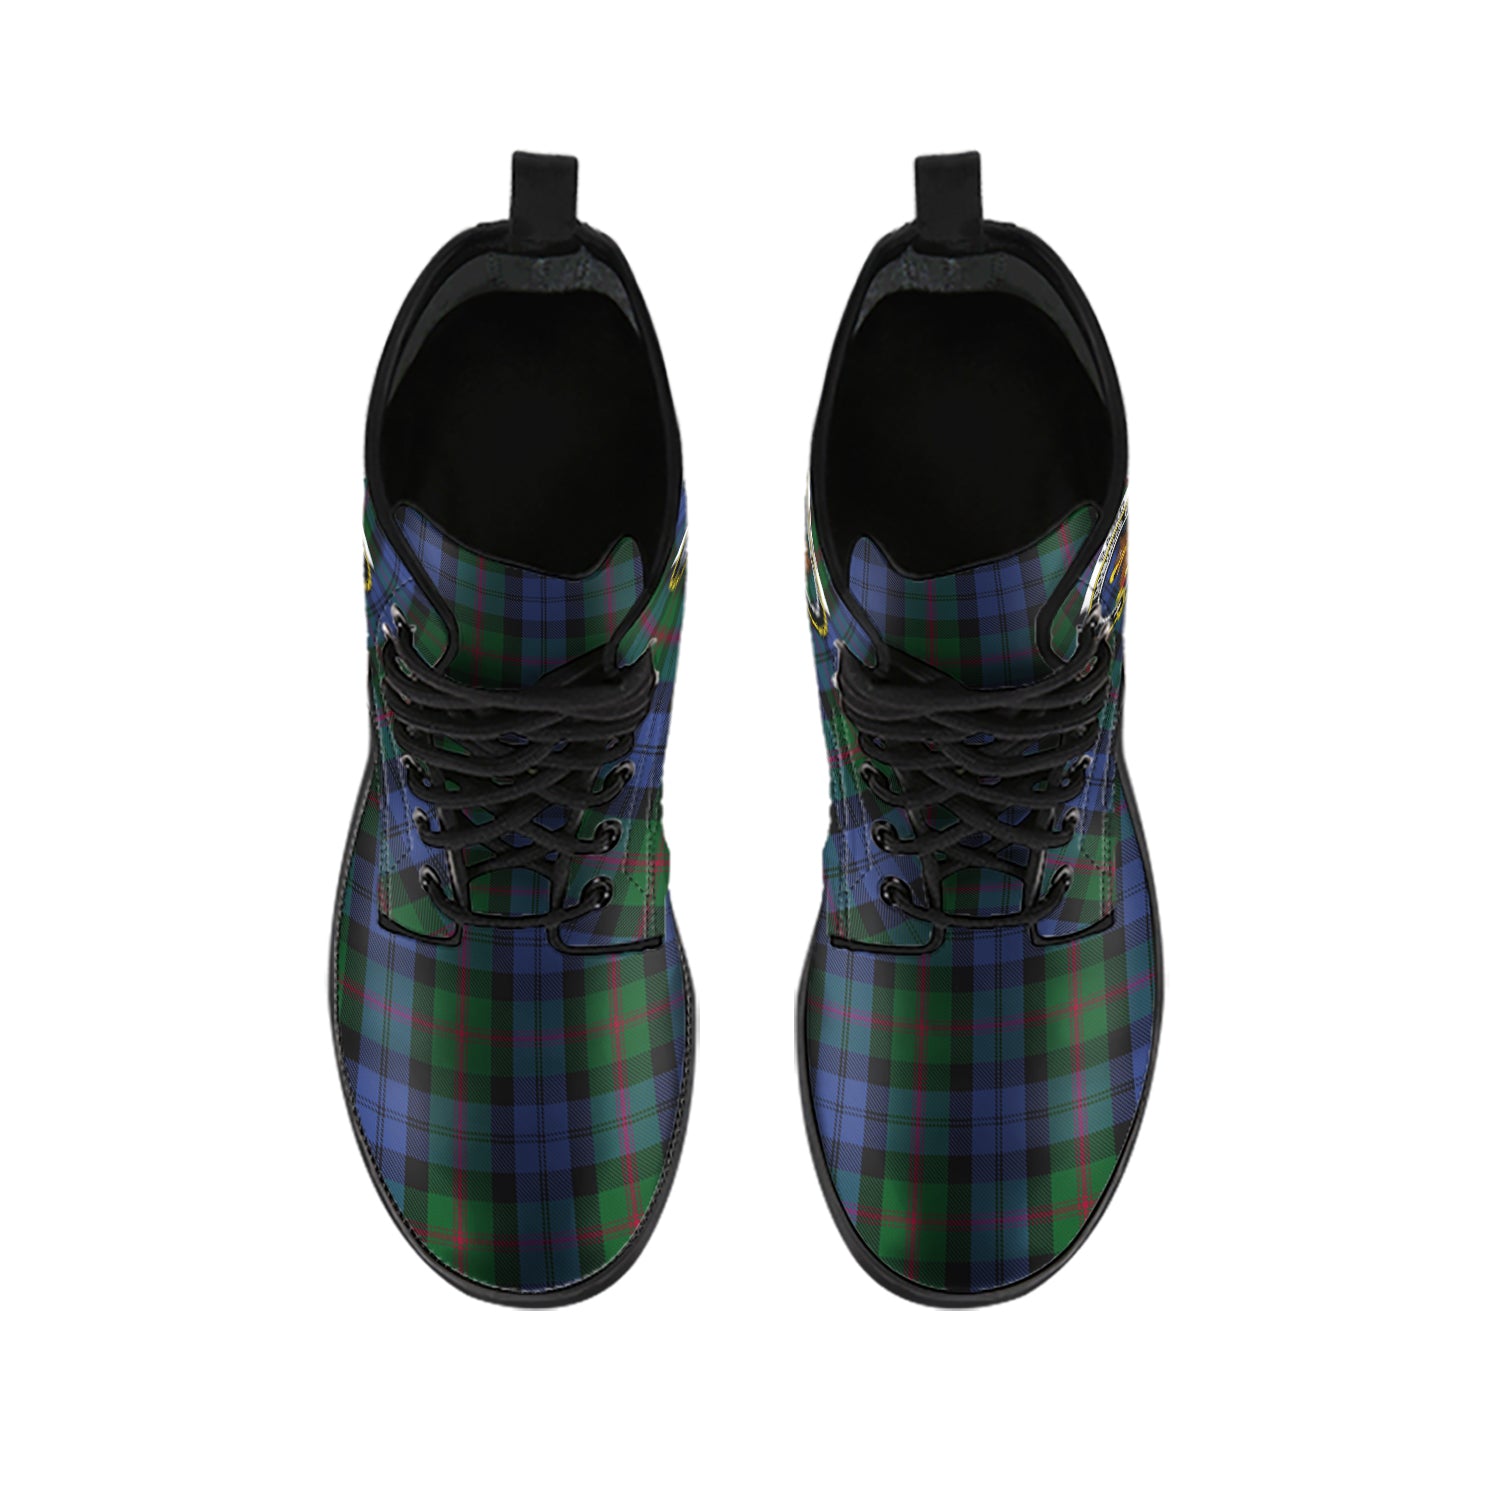 Baird Tartan Leather Boots with Family Crest - Tartanvibesclothing